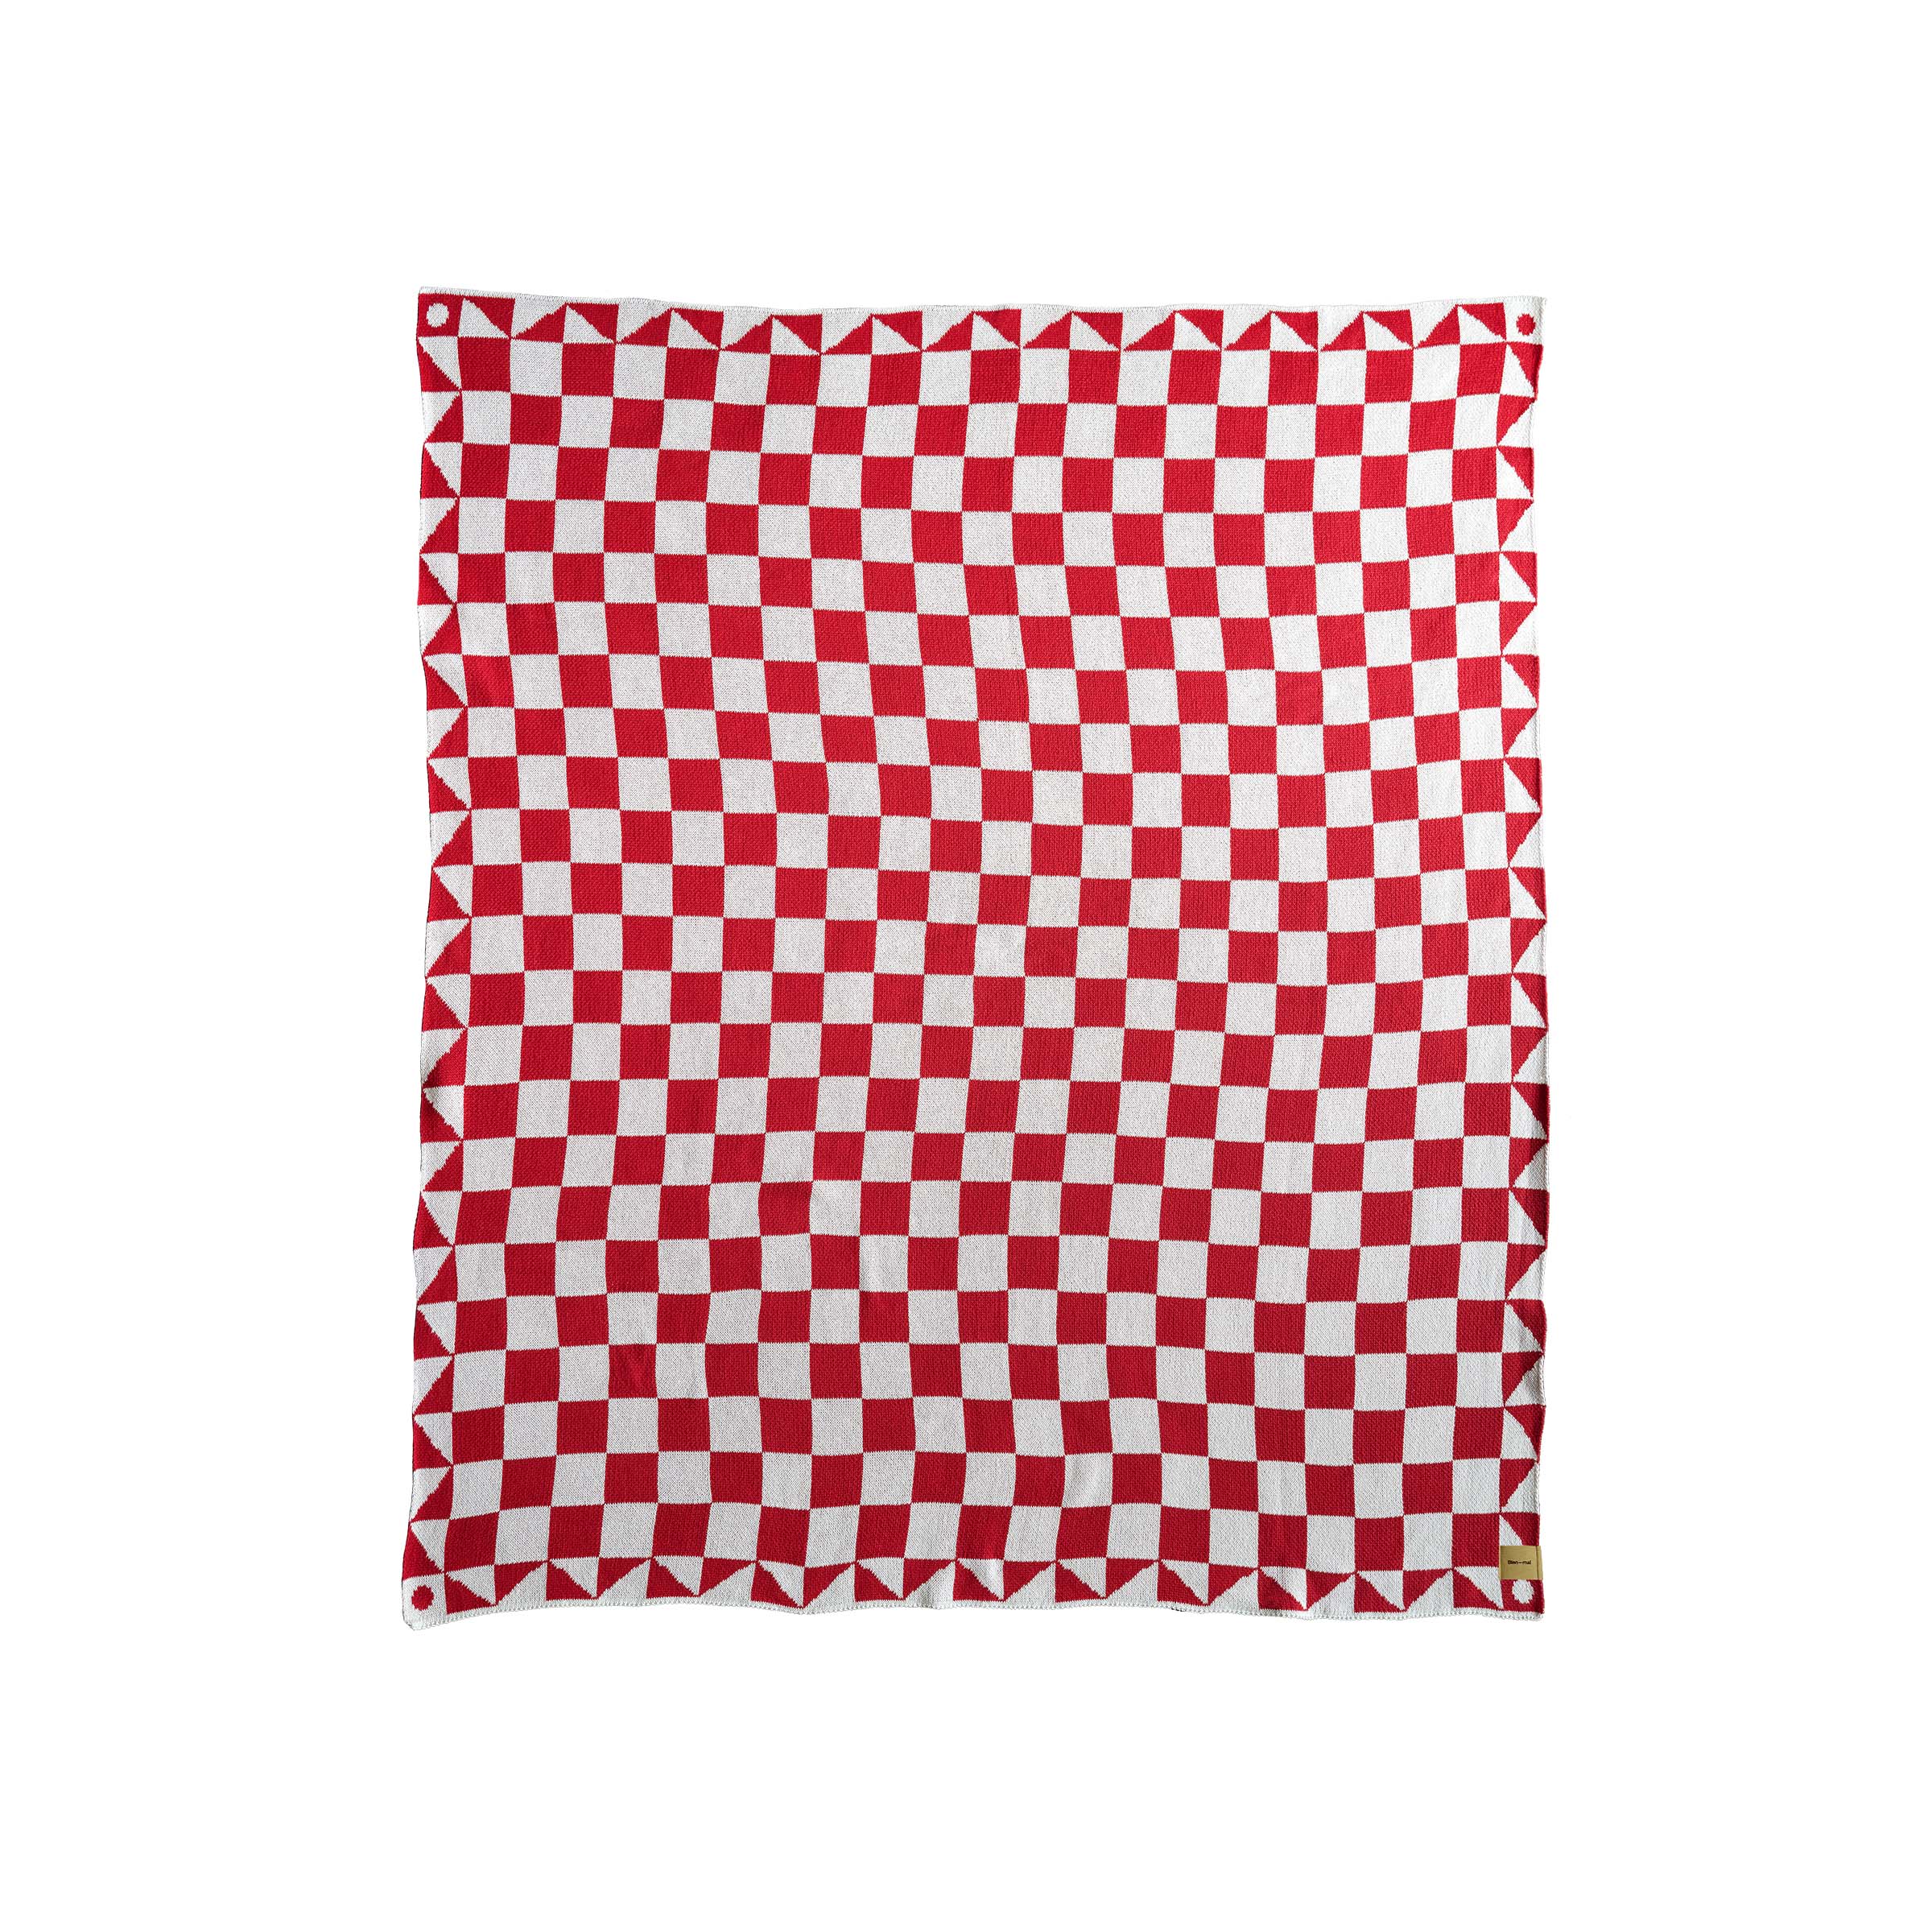 Bien Mal - Red and white Checkered Throw Blanket. Made in NY. Designed in LA